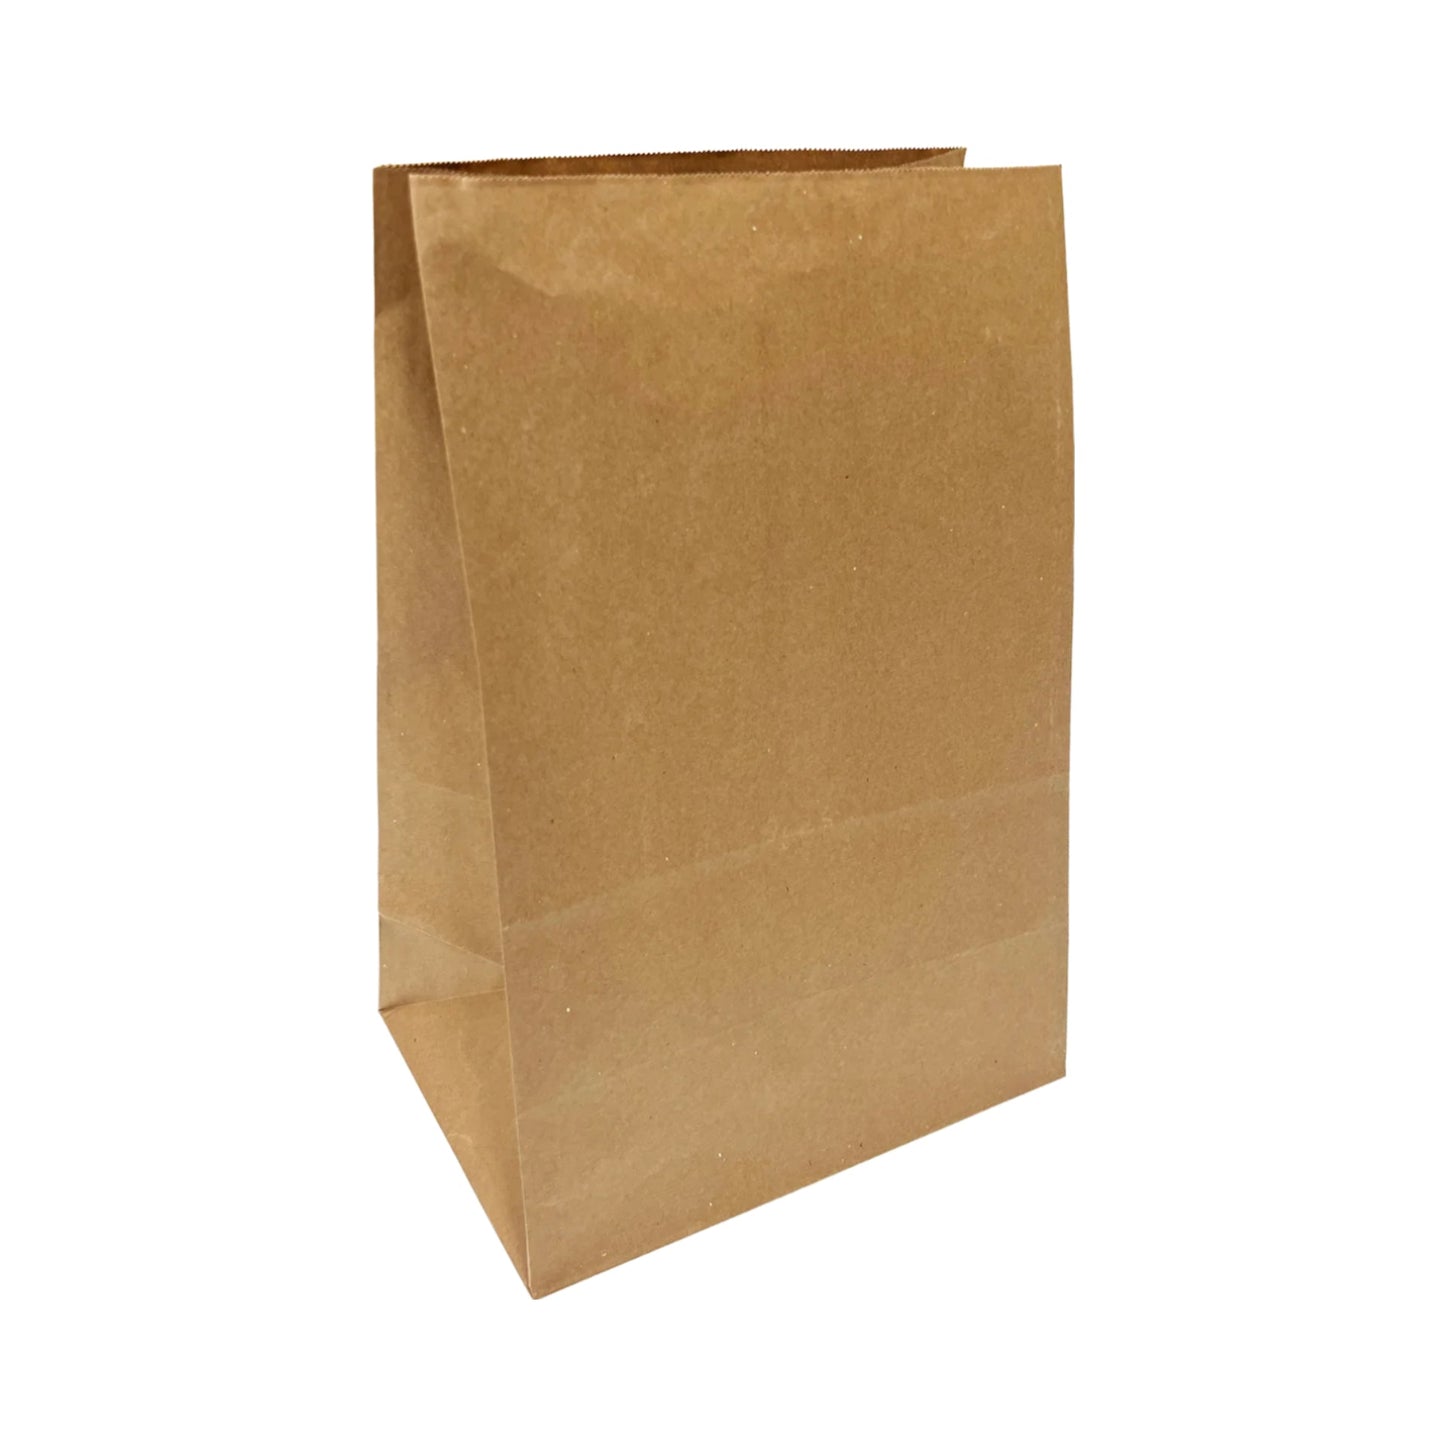 500pcs #5 Grocery Bags 5.25x3.25x11 inches; $0.053/pc